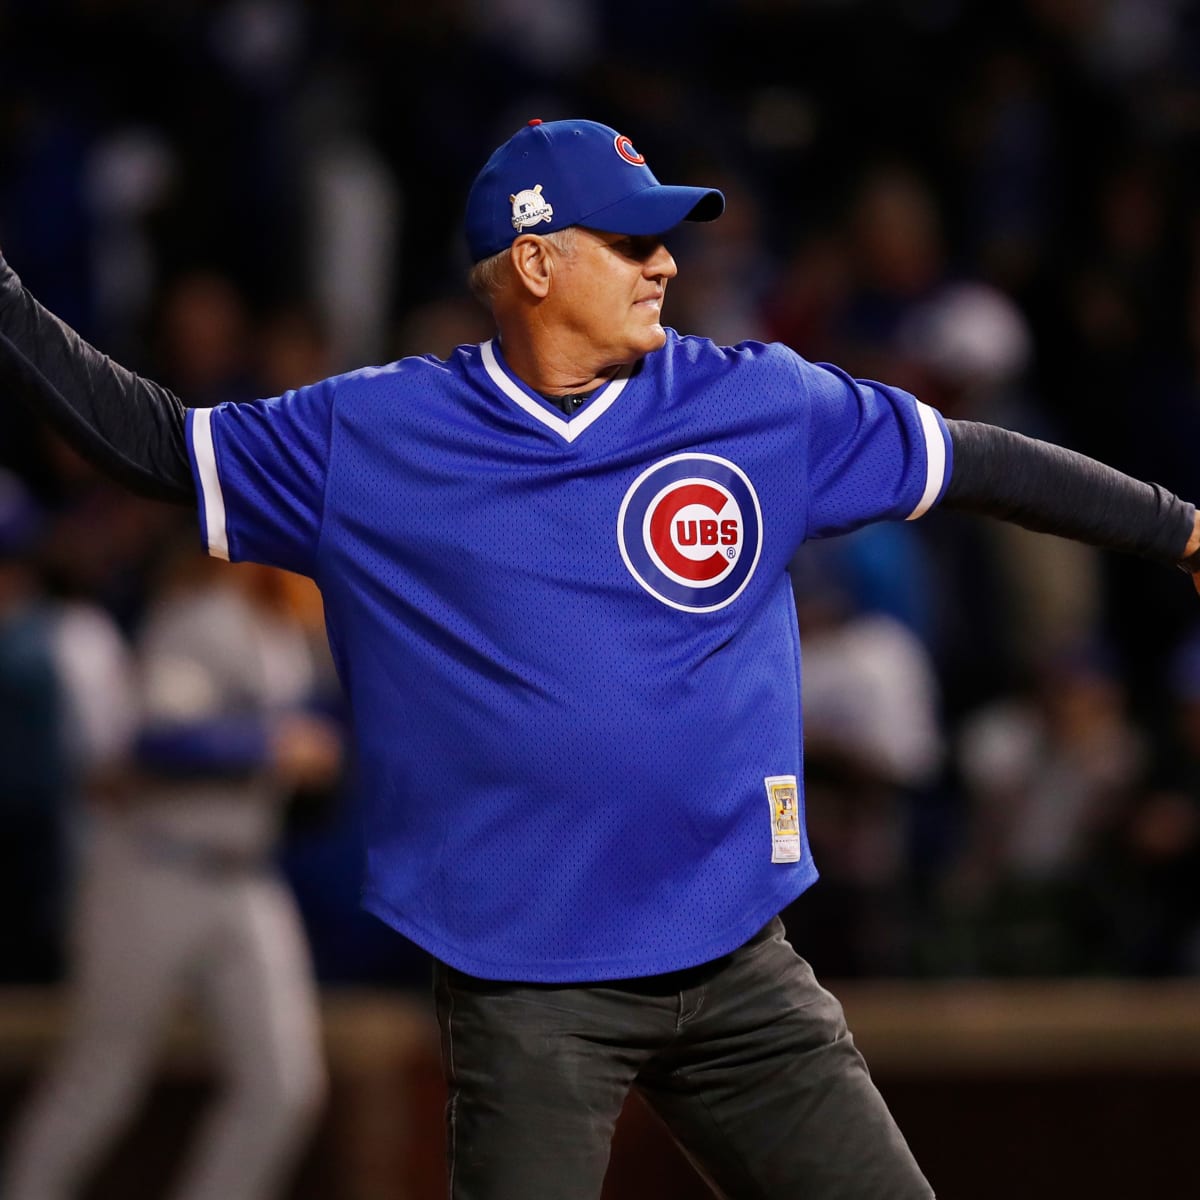 Cubs to Give Sandberg Statue, Not Ready to Reunite with Sosa, Chicago News